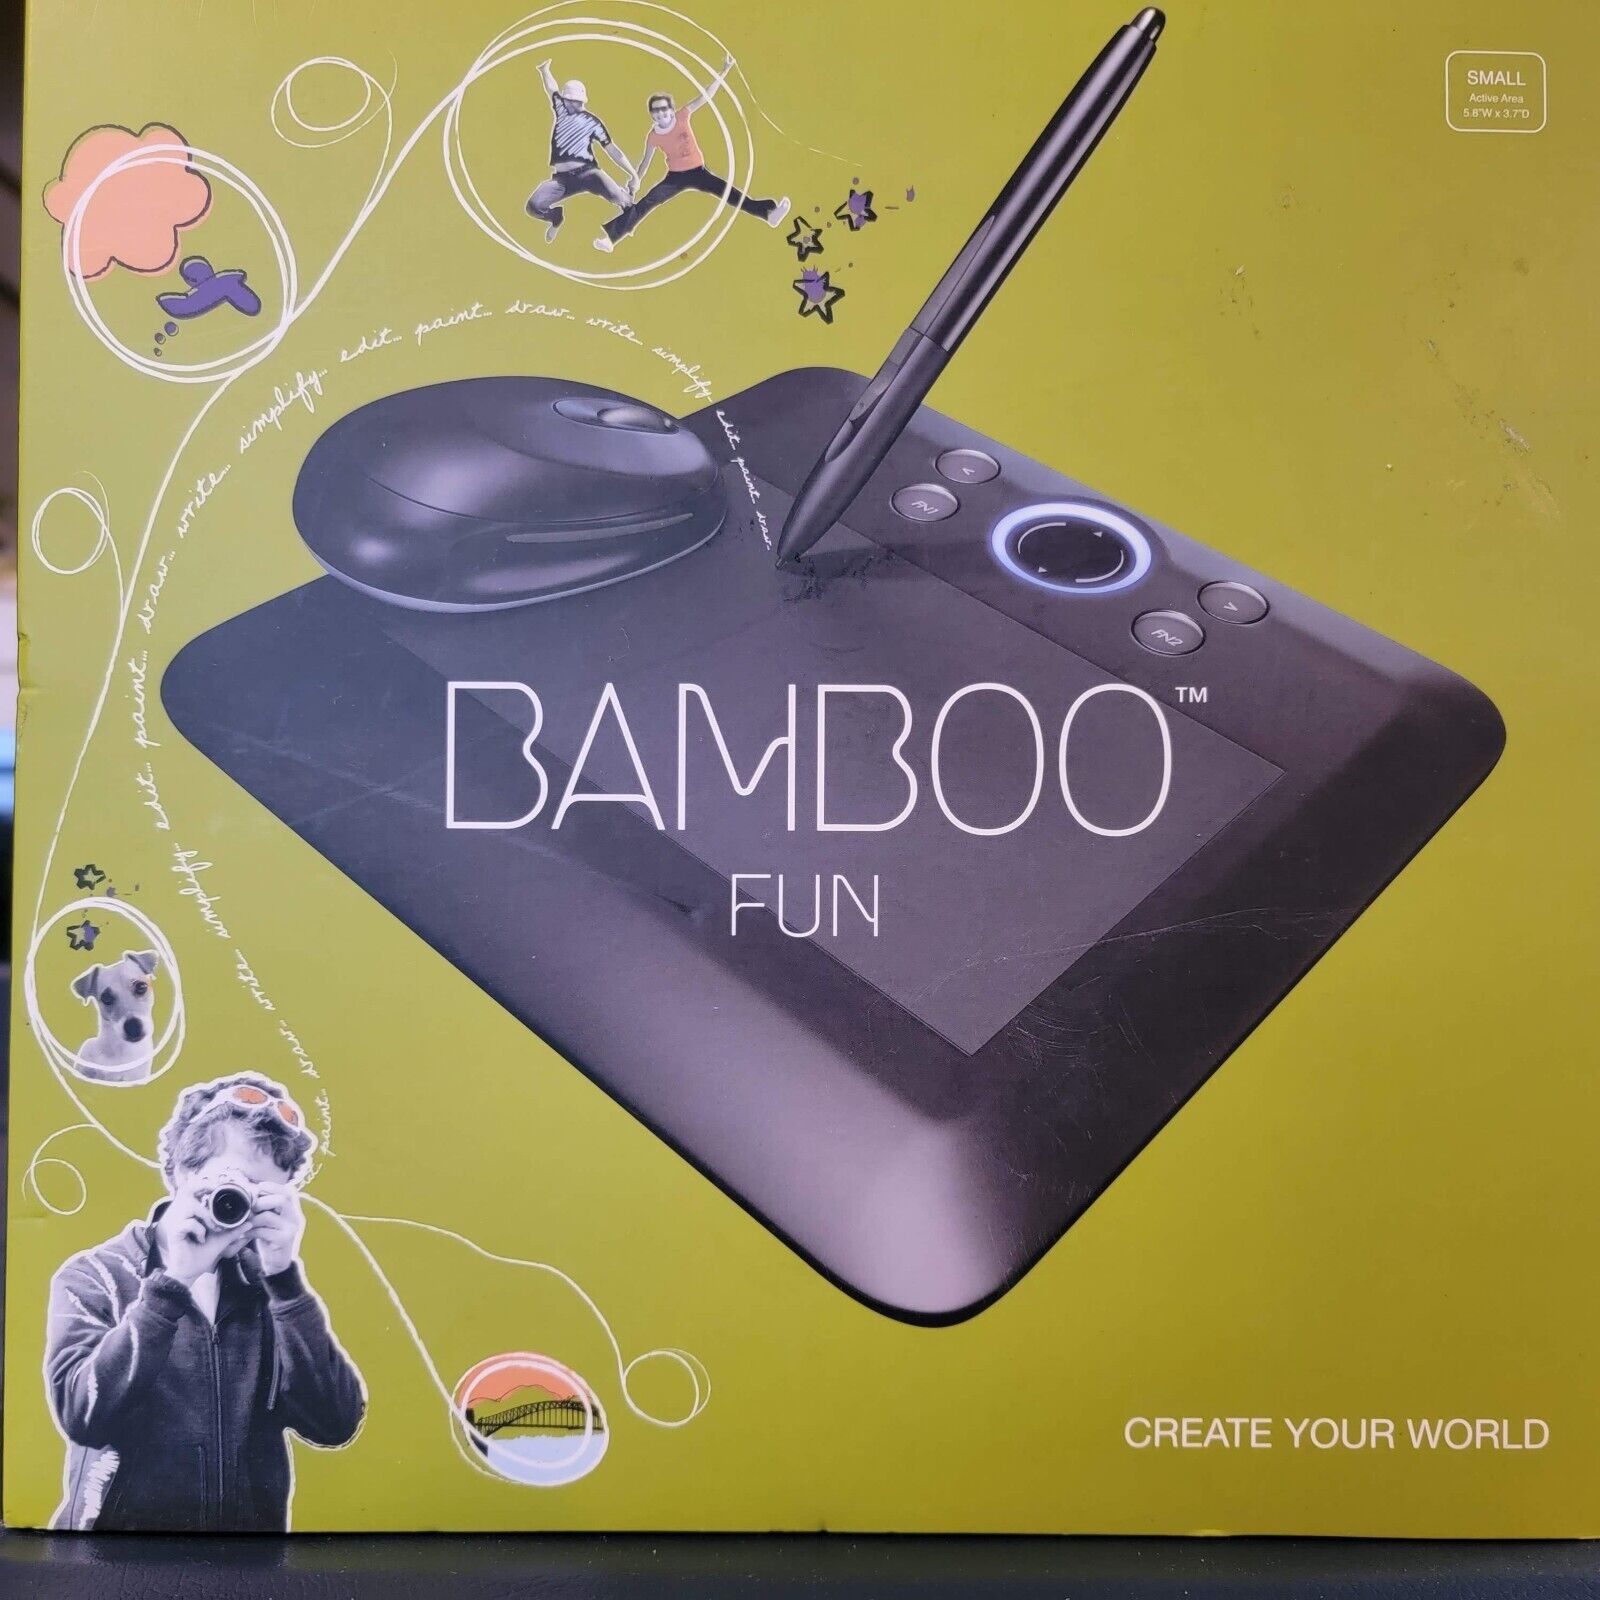 Wacom Bamboo Fun CTE450K USB Drawing Tablet With Pen & Mouse Black In Box